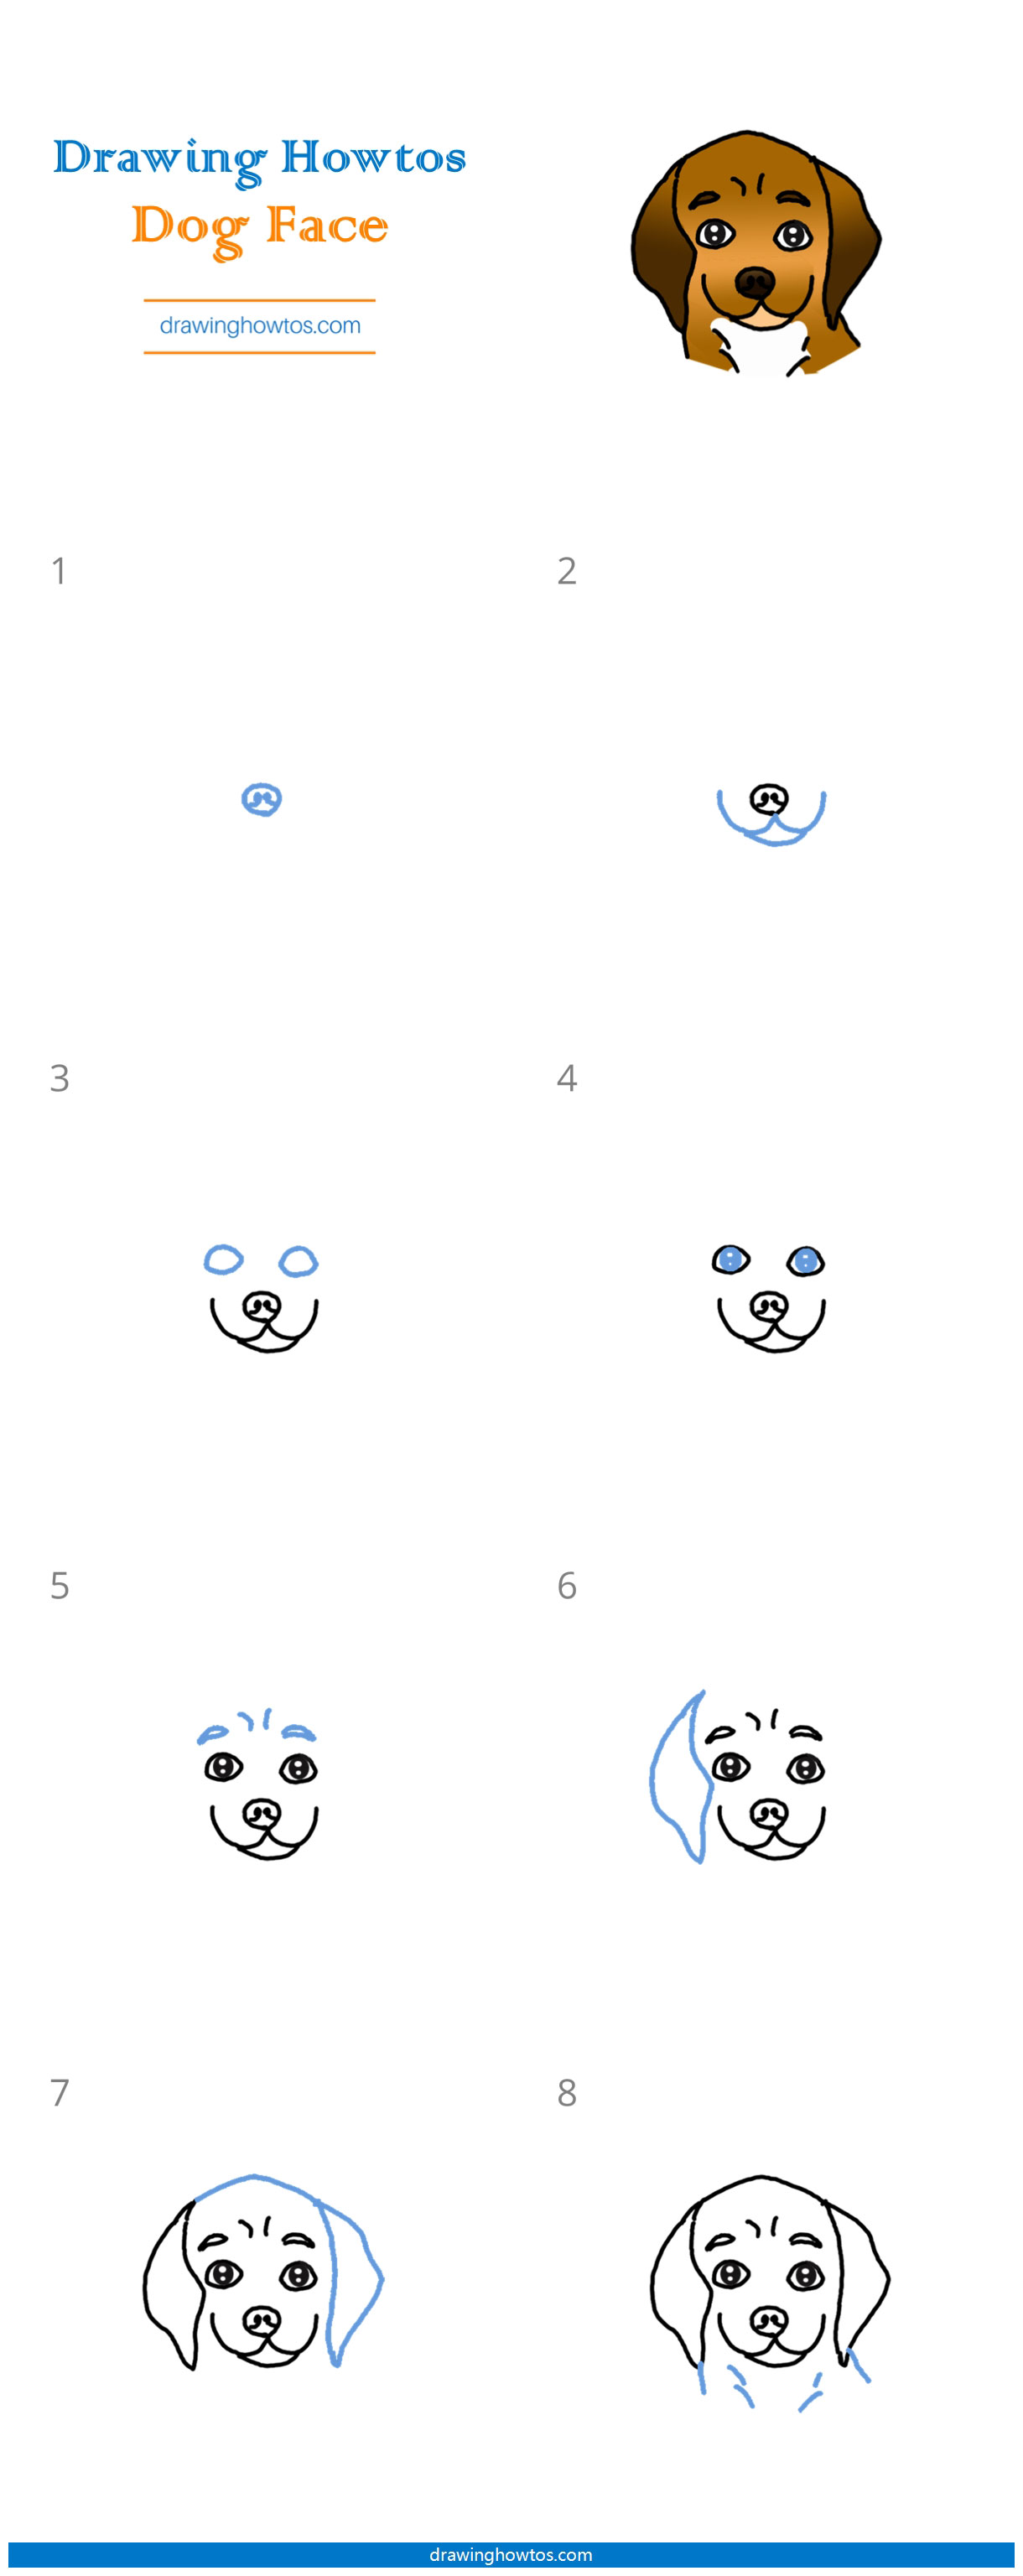 How to Draw a Dog Face - Step by Step Easy Drawing Guides - Drawing Howtos